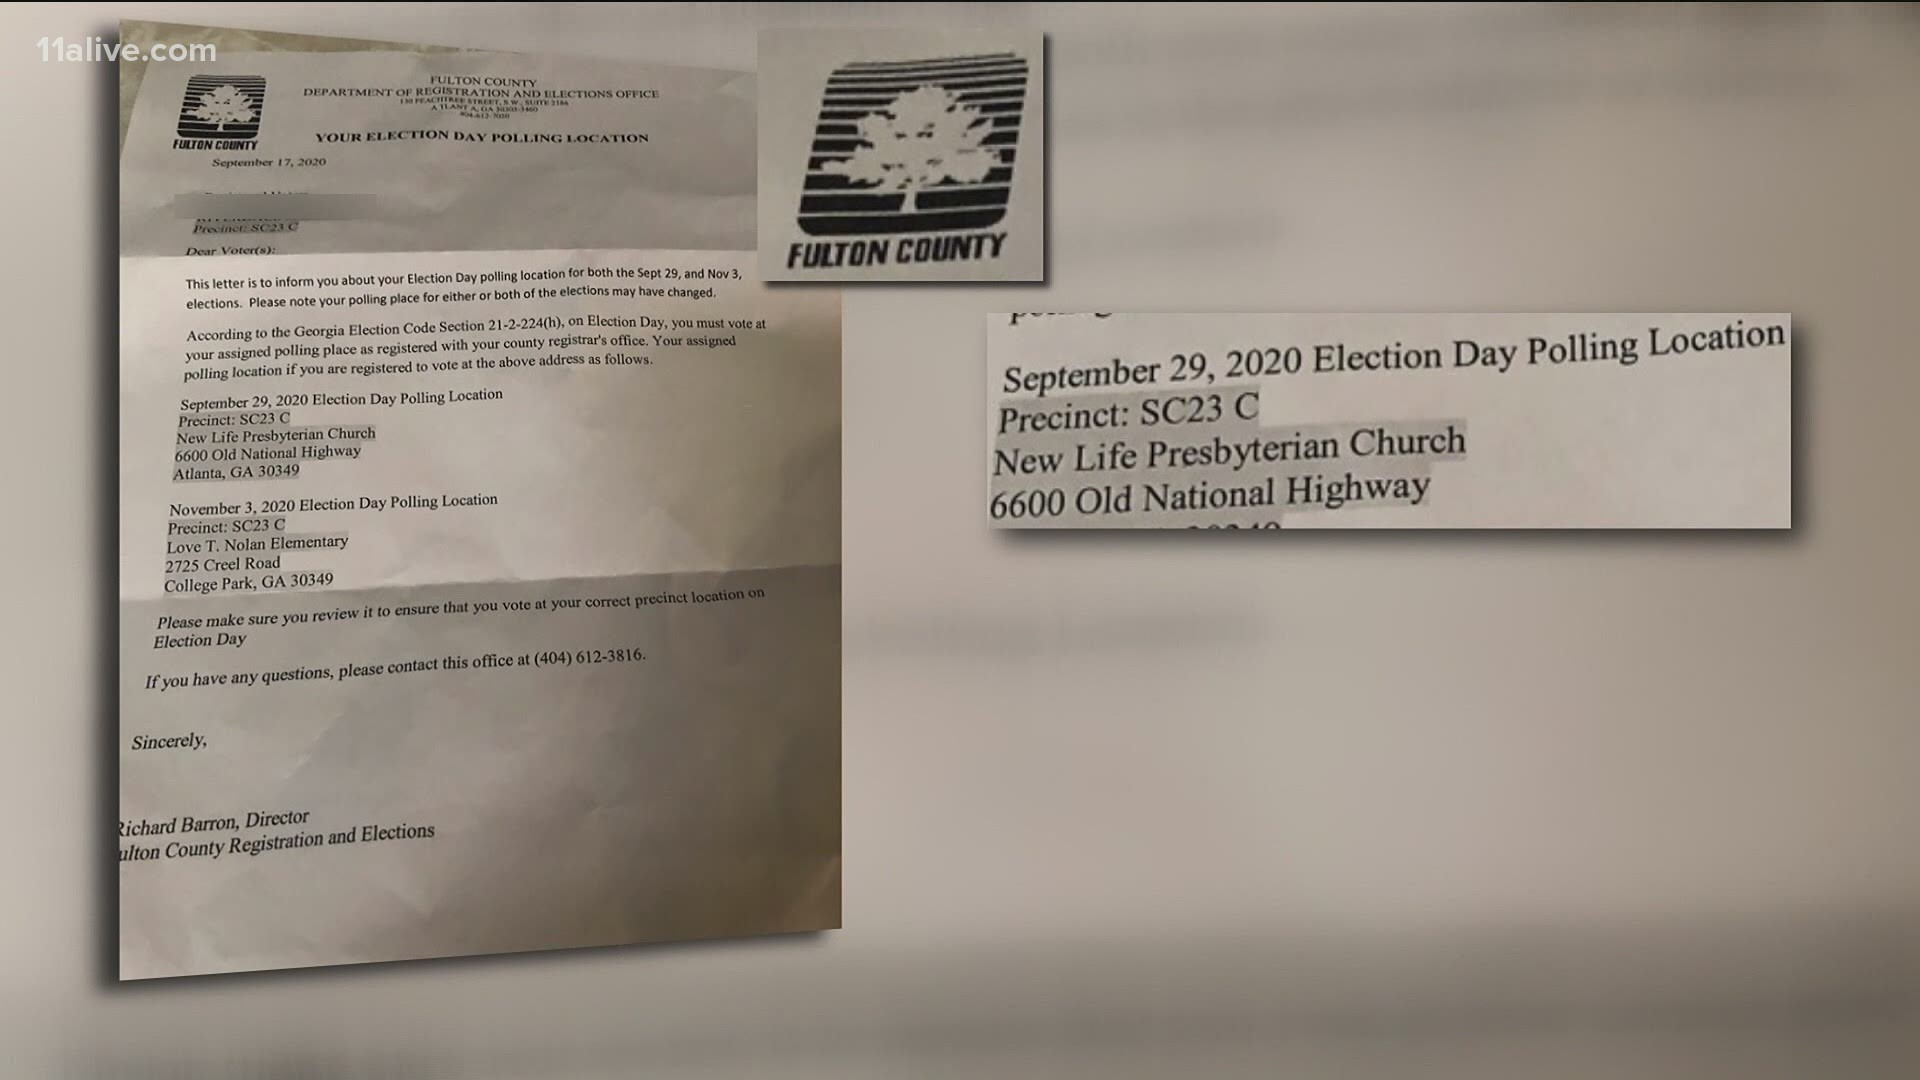 Fulton County officials said they should have never received the letter to vote for the 5th congressional district seat.